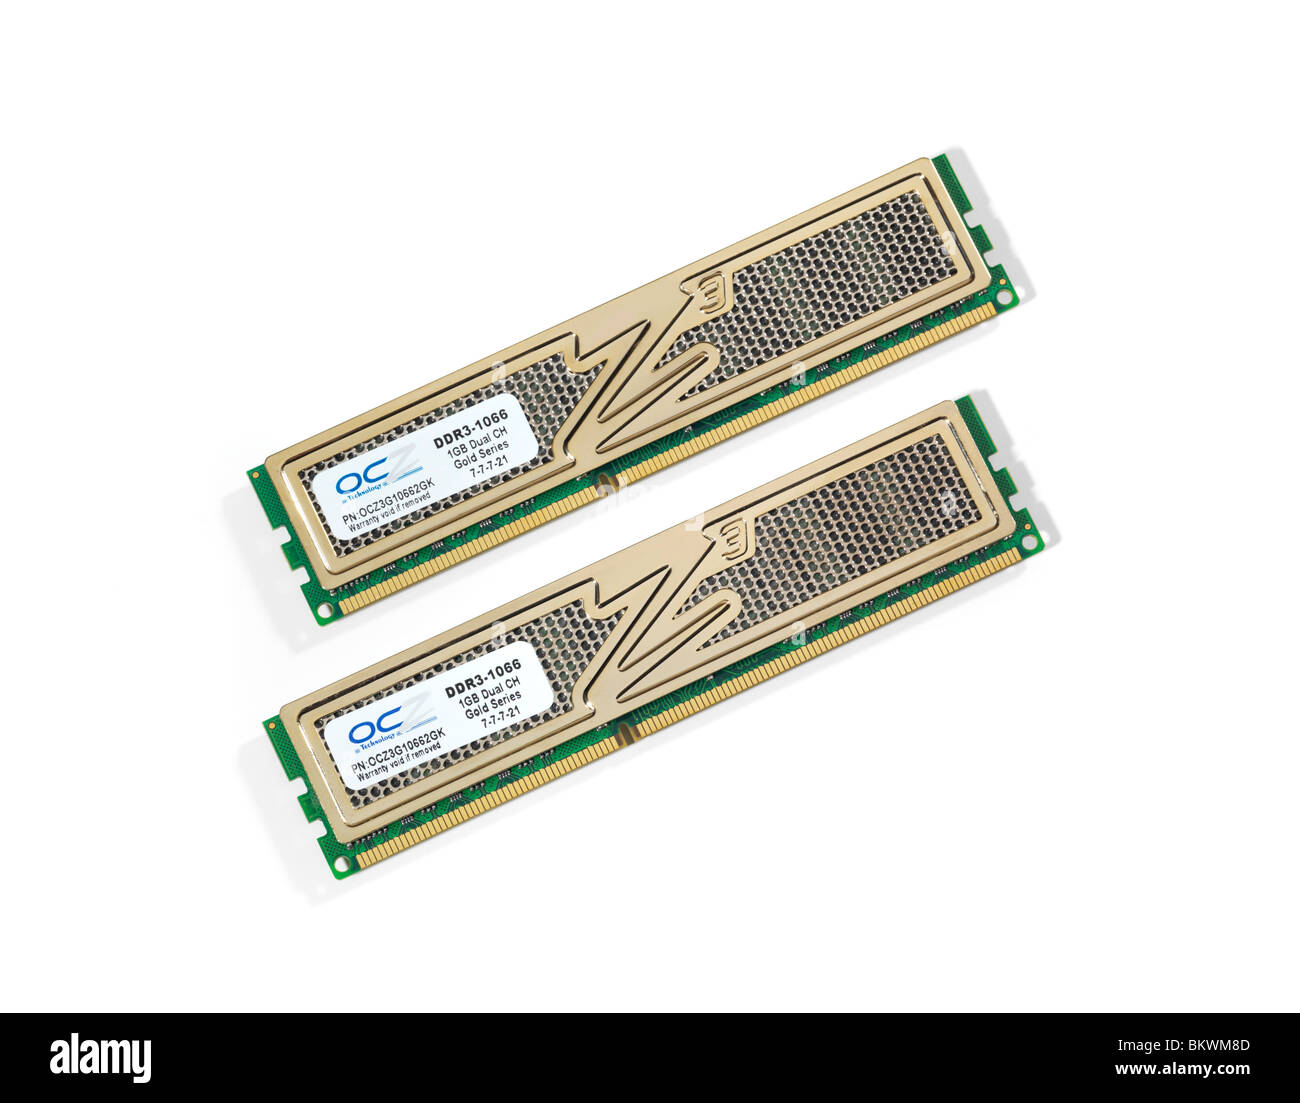 Two desktop computer OCZ DDR-3 memory modules isolated on white background Stock Photo